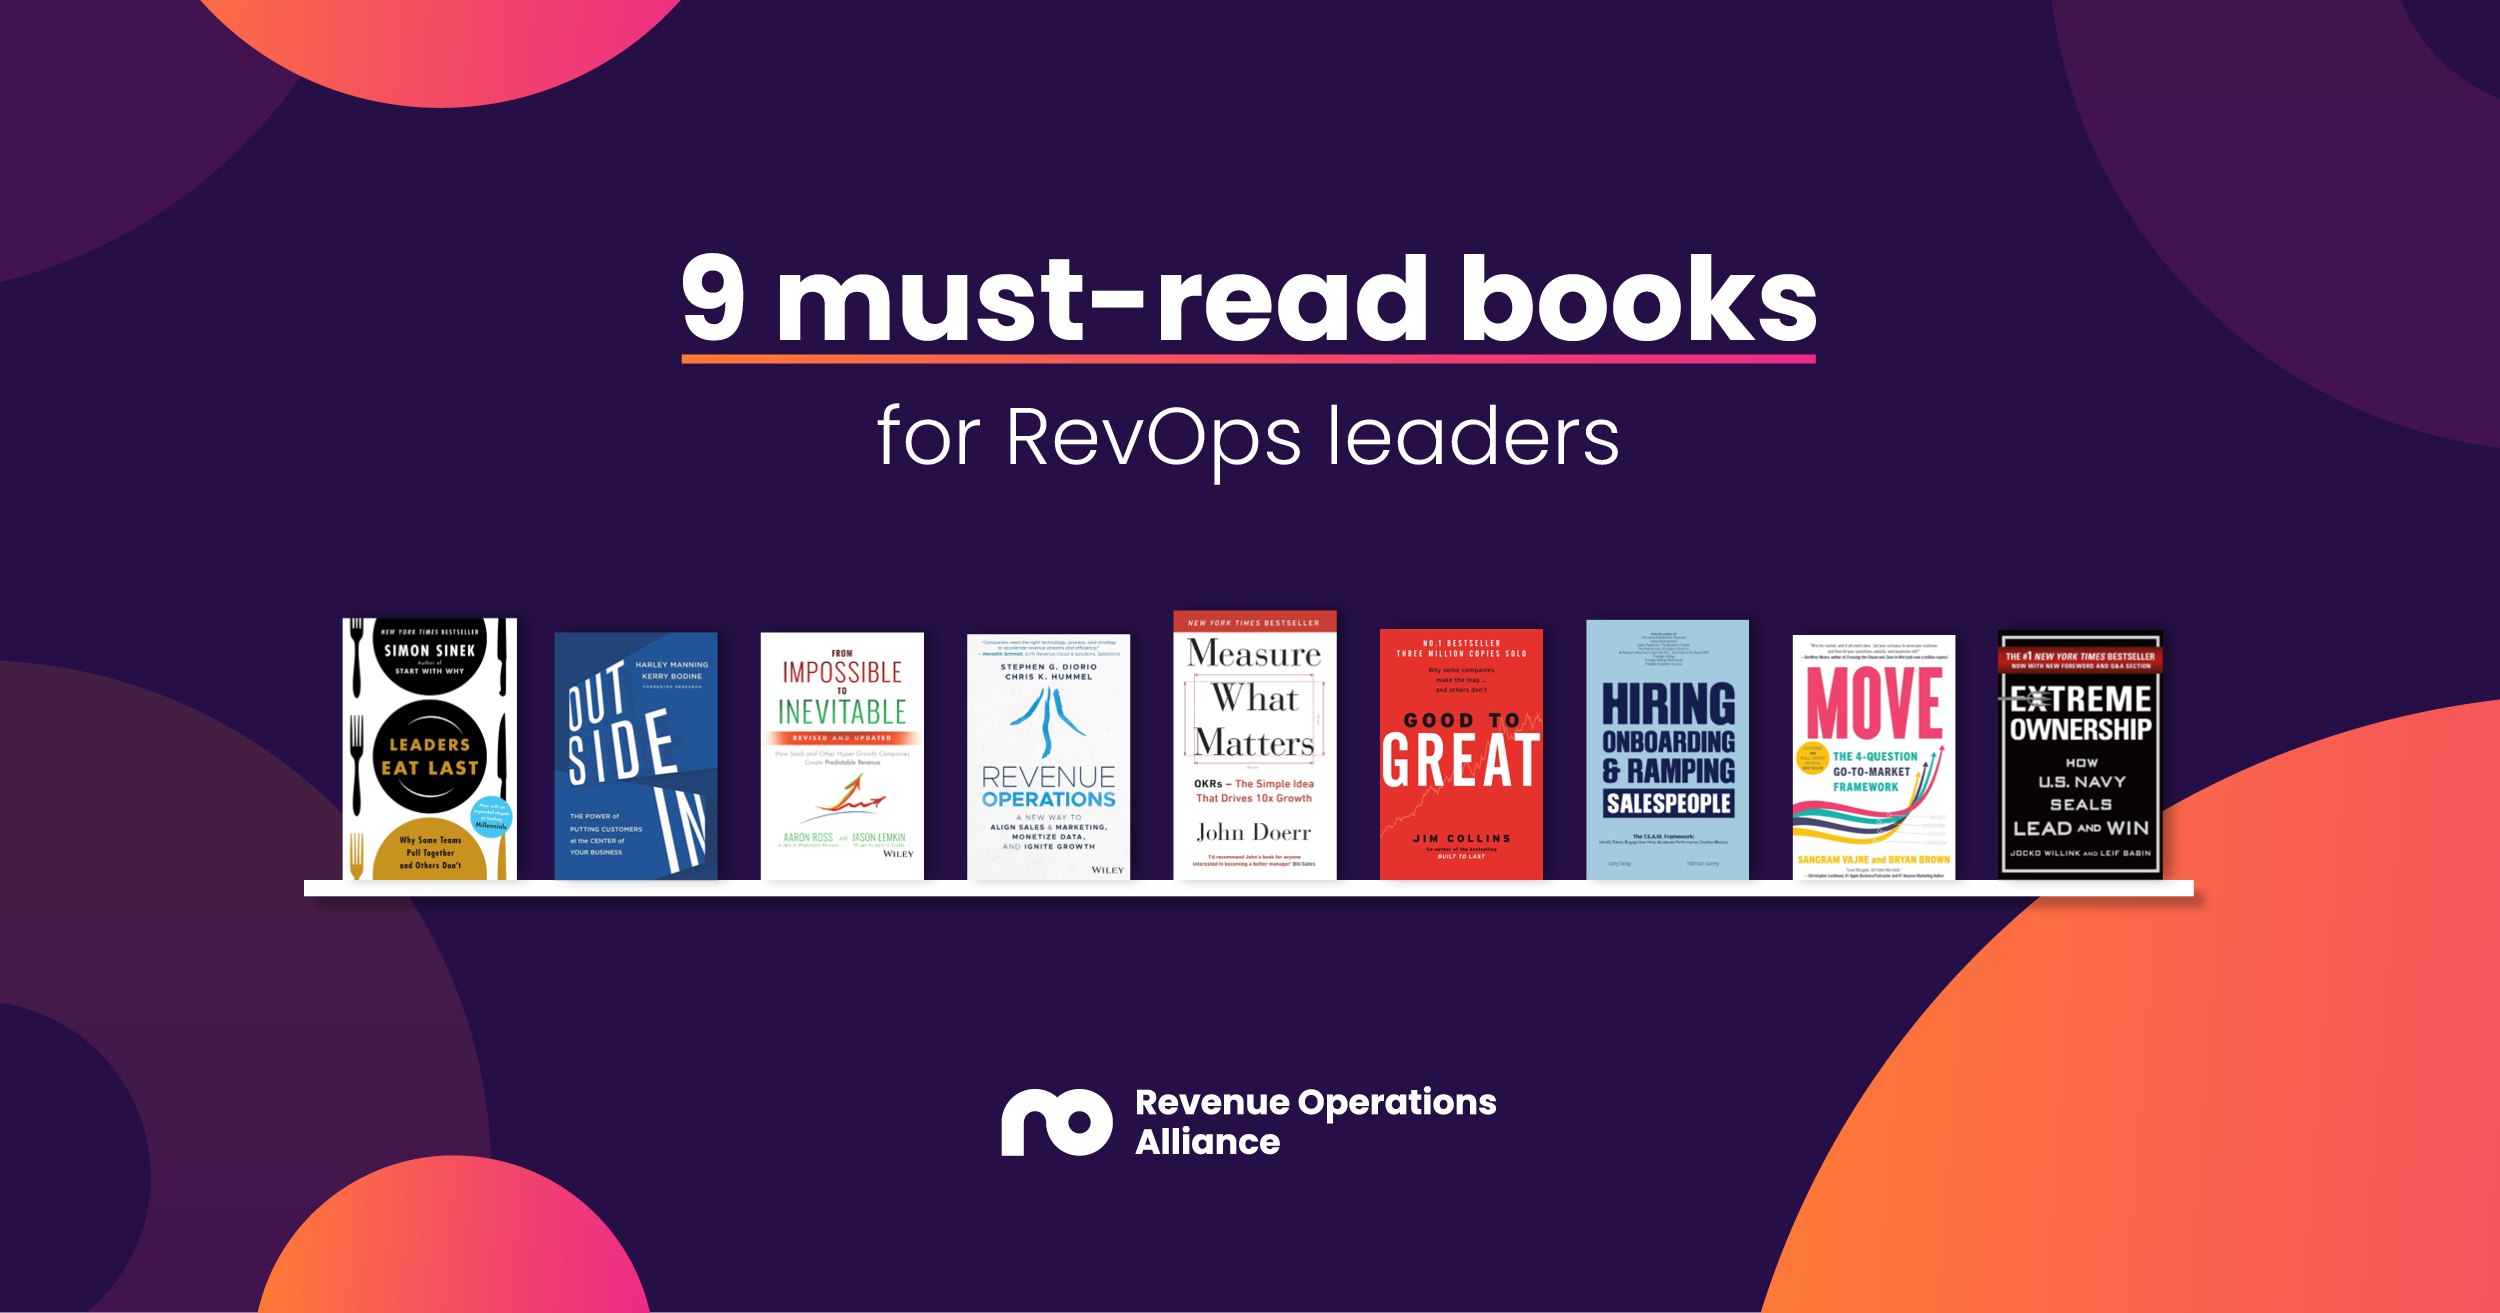 9 must-read books for RevOps leaders, with each book cover shown.